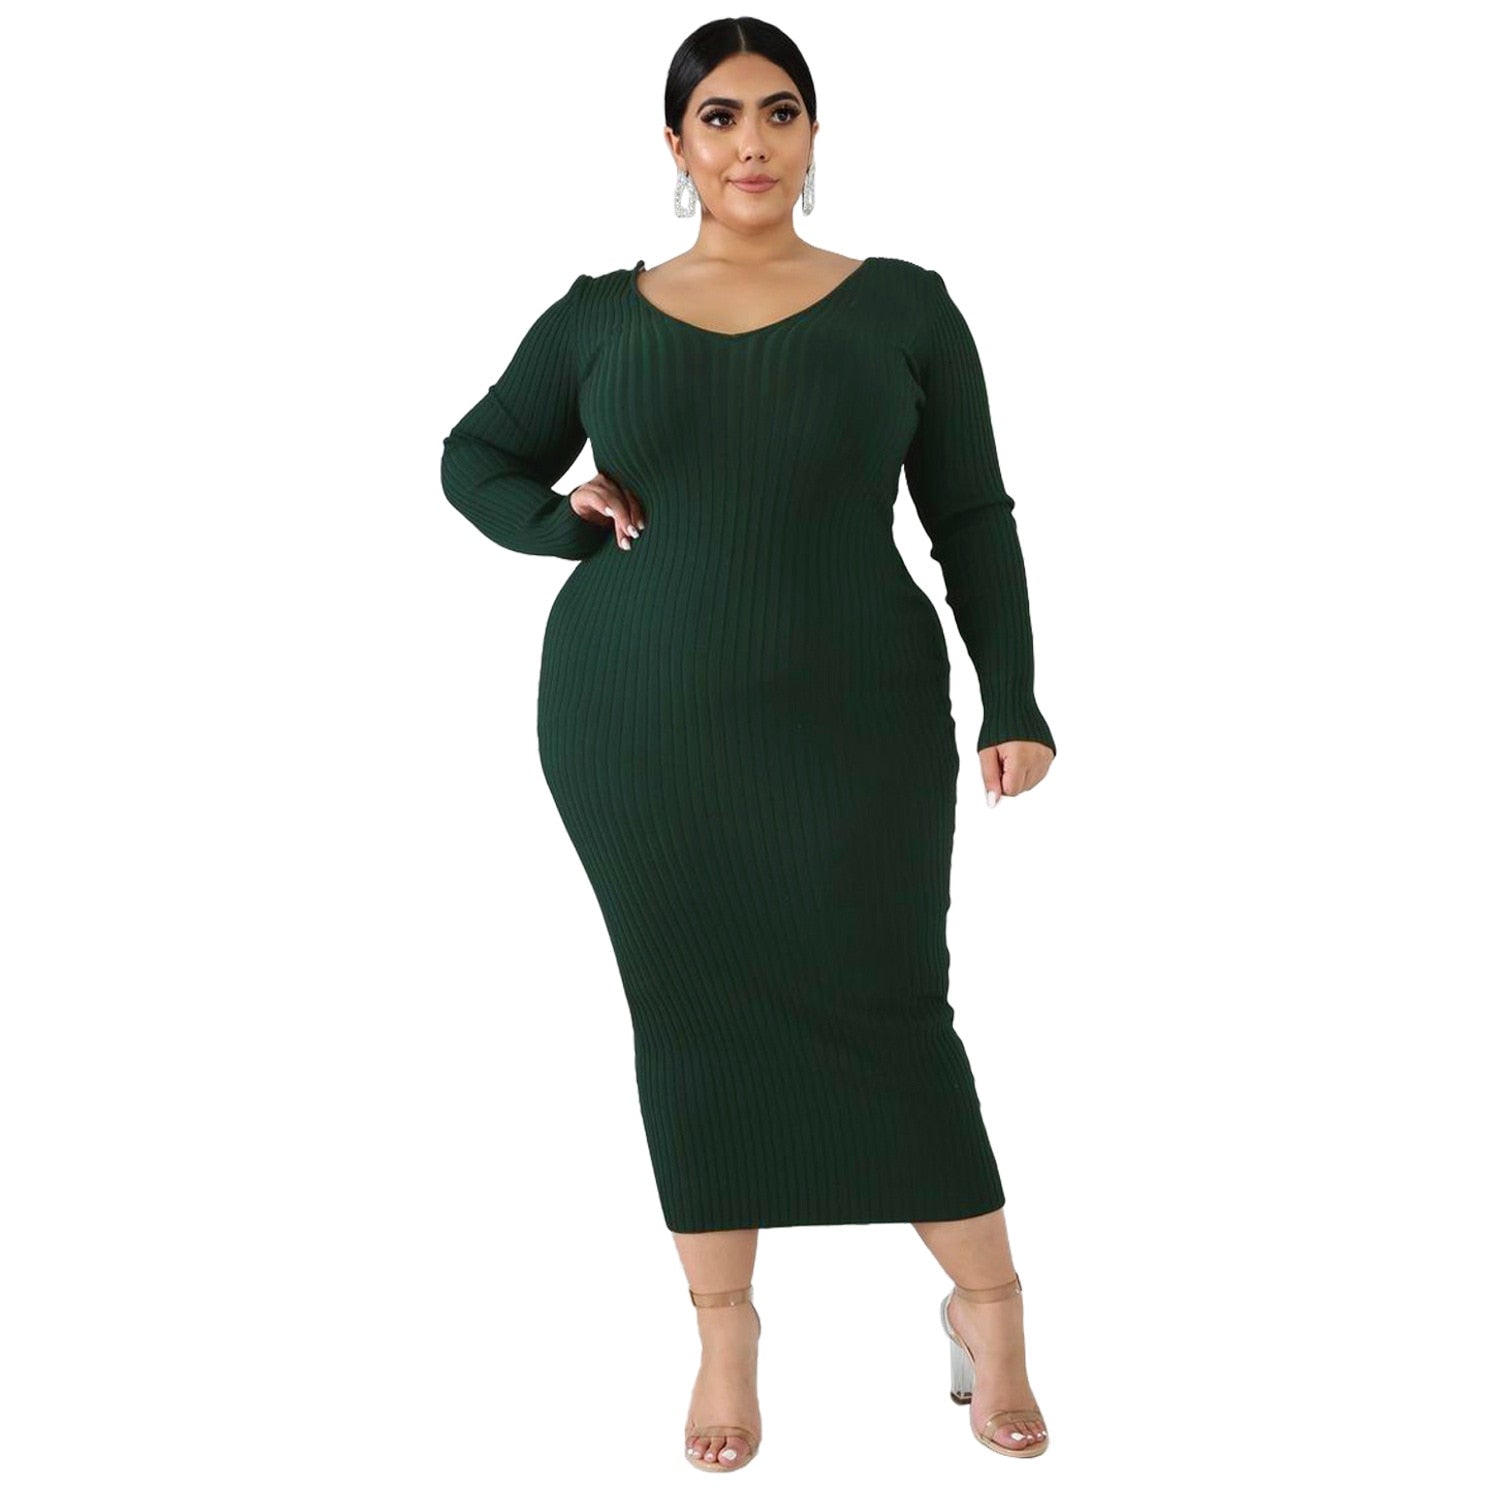 Aovica Rib Sunken Stripe Knitted Cotton Dress Solid Color Women Casual Plus Size Dresses Fashion Autumn Winter Long Clothes 2022